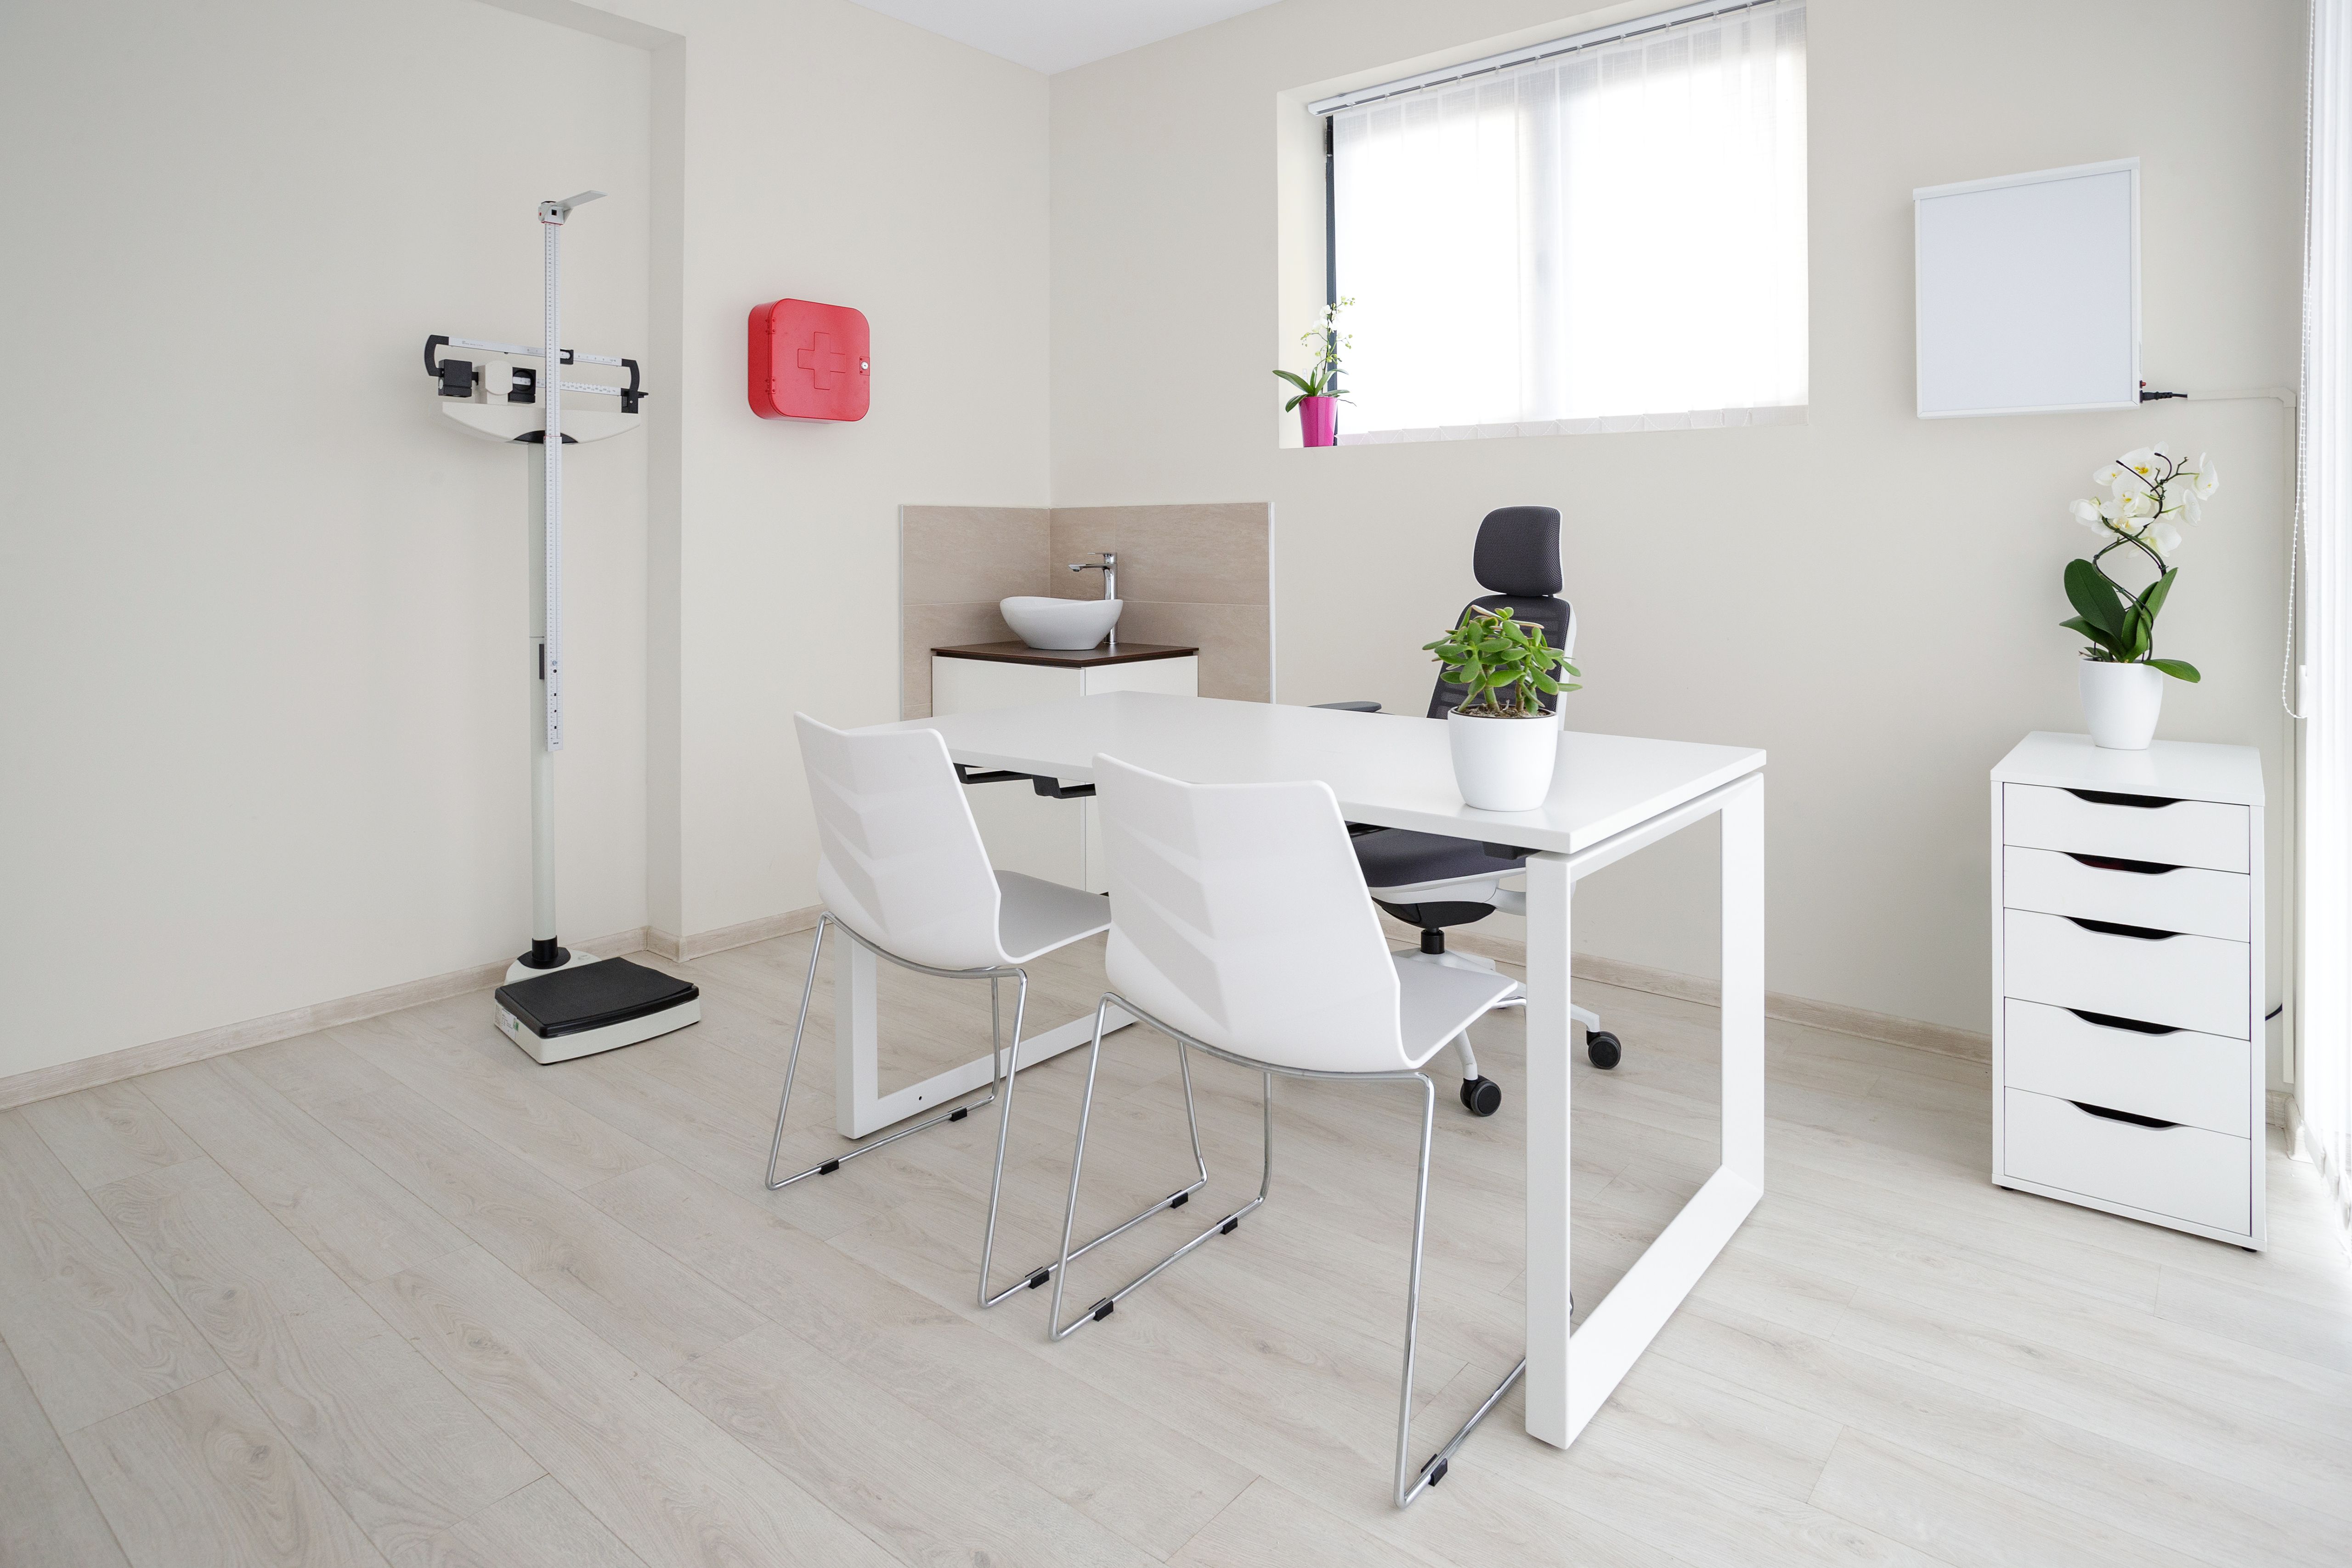 Healthcare consultation space featuring blank canvas